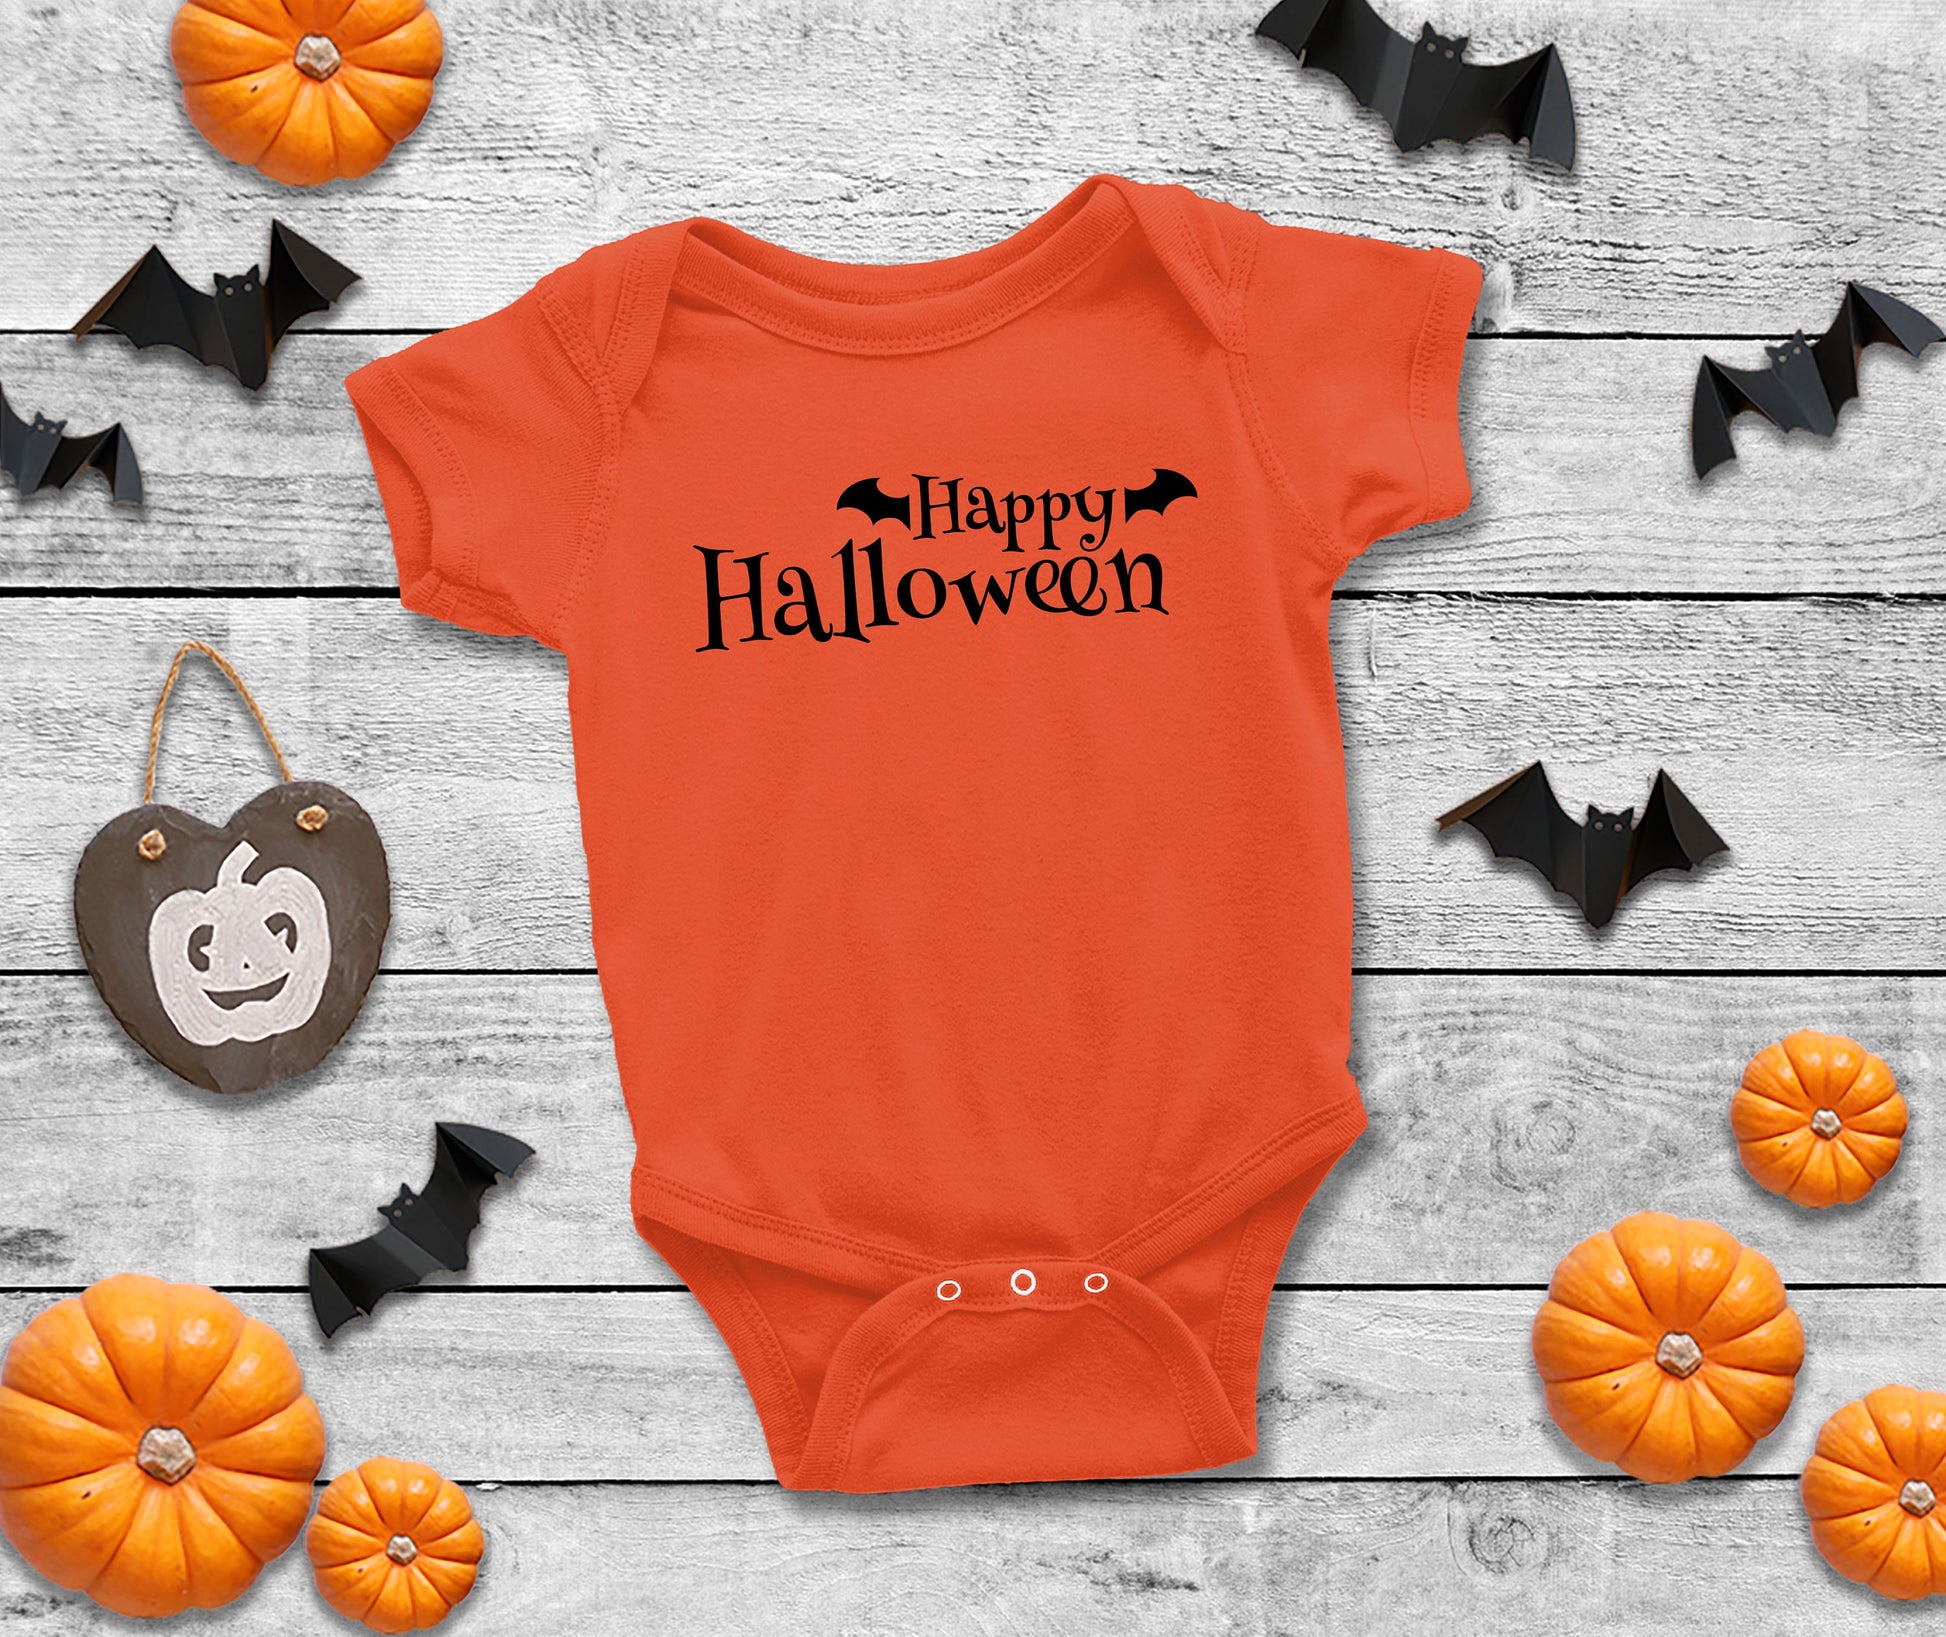 Happy Halloween Infant or Kids Shirt or Bodysuit - My First Halloween - cute halloween baby outfit - halloween bat outfit - 1st halloween